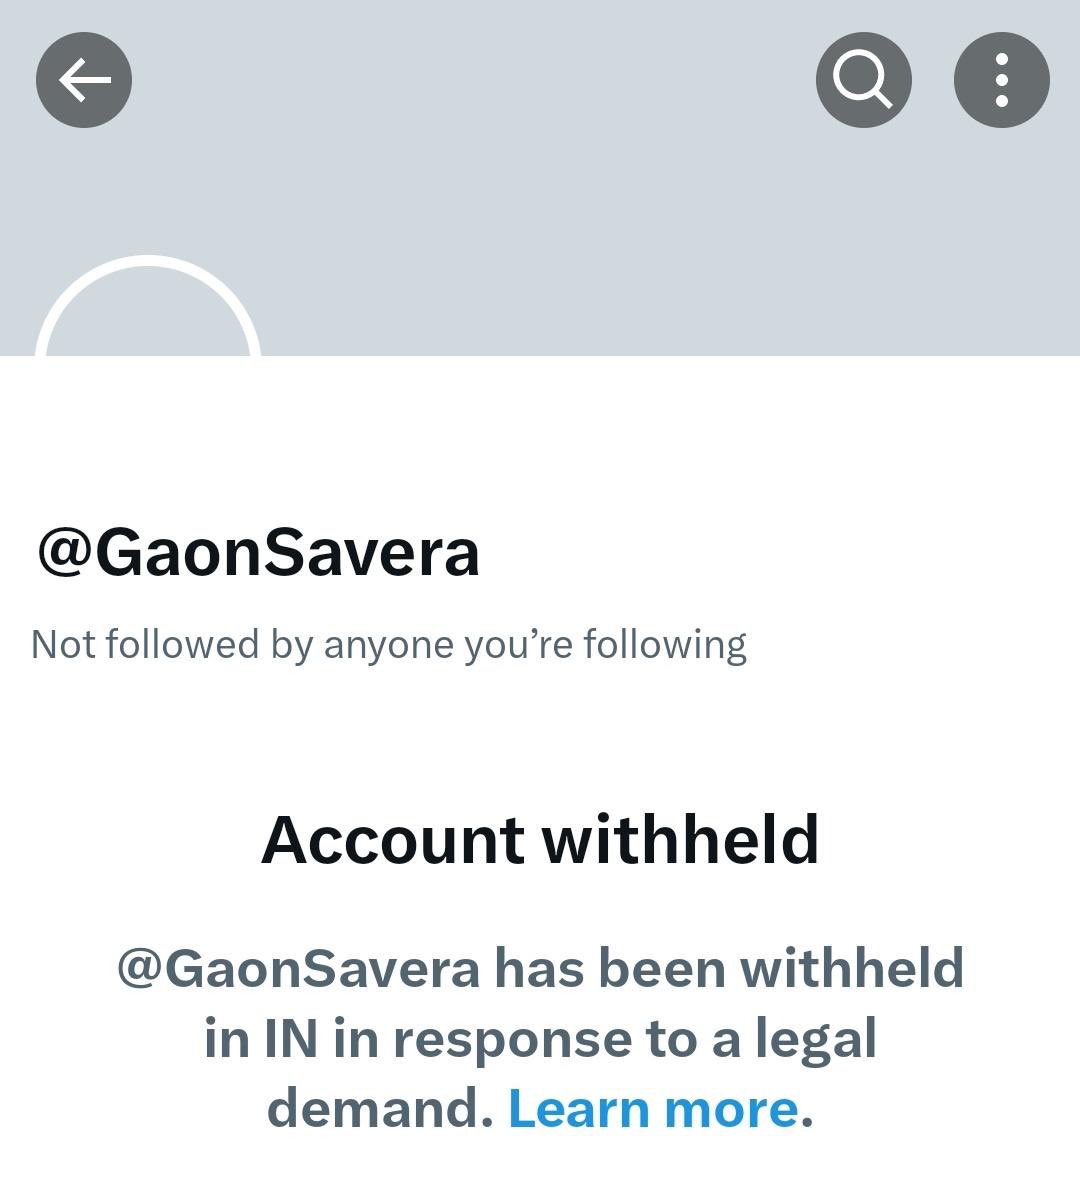 It is learnt that Haryana based media house Gaon Savera Trust has challenged blind and blanket social media blockings by the Government in India. Gaon Savera Trust has filed a writ petition in Punjab and Haryana High Court.